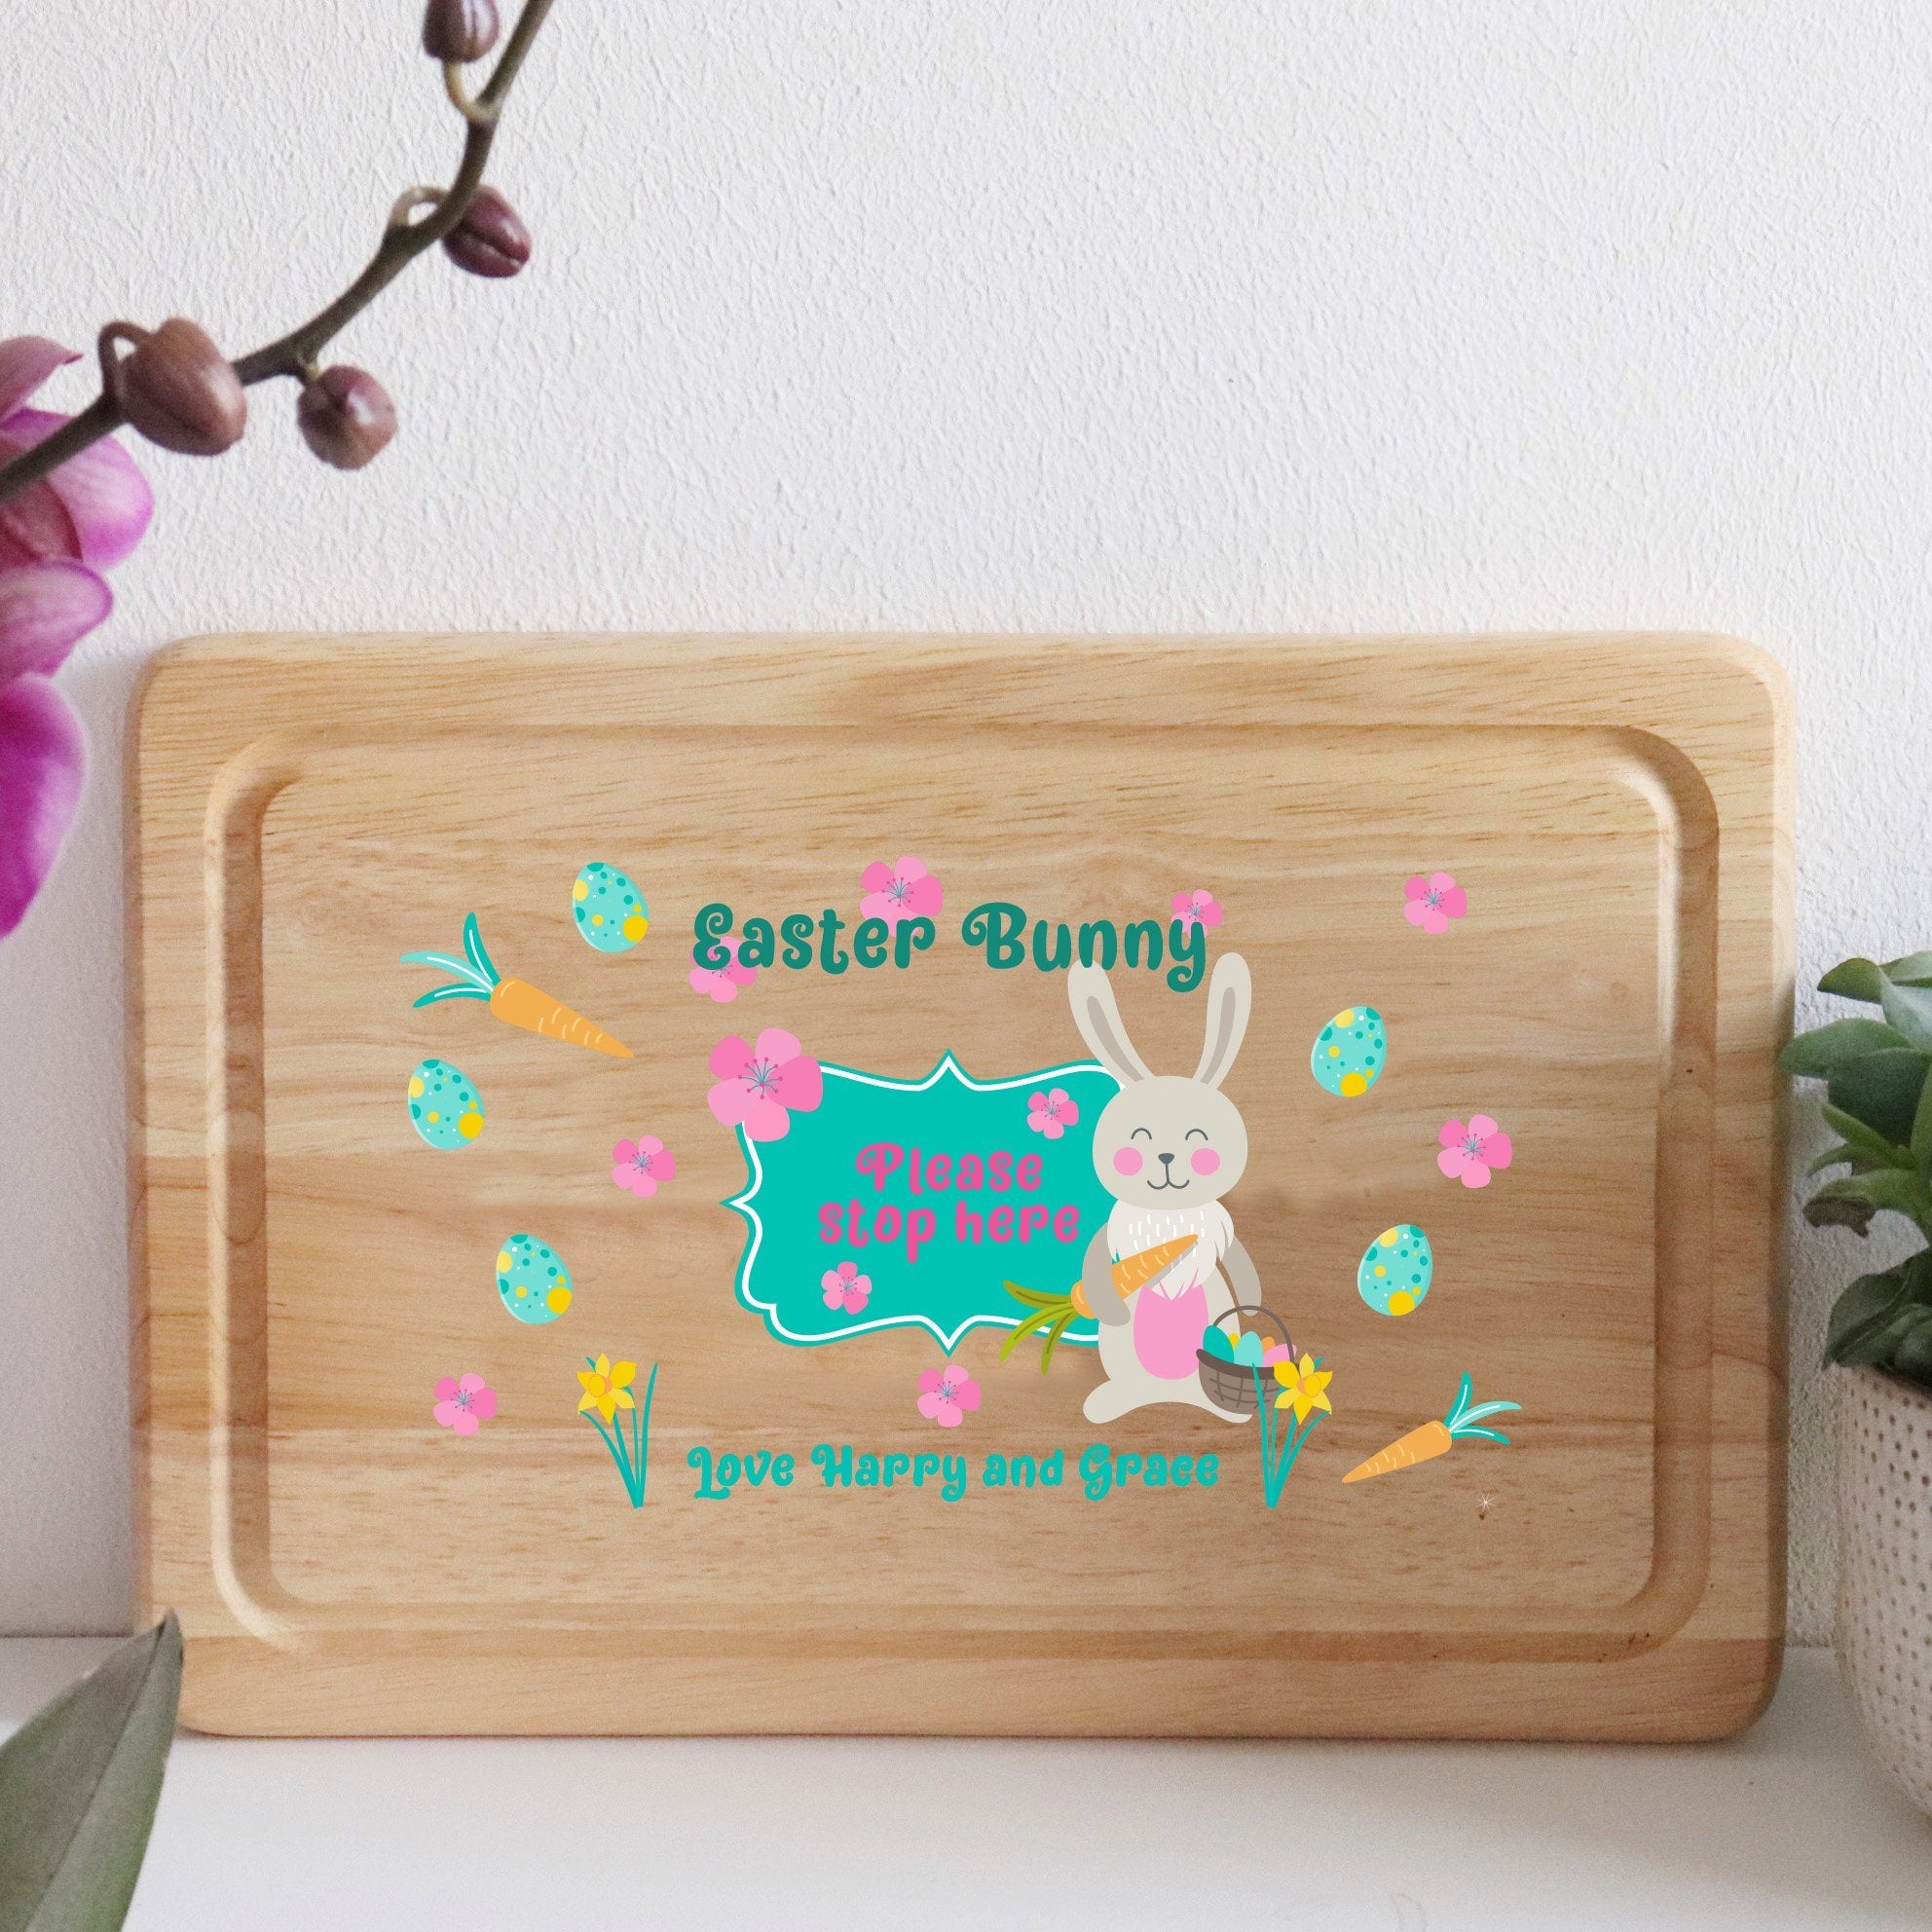 Personalised Colour Wooden Easter Treat Platter  - Rabbit